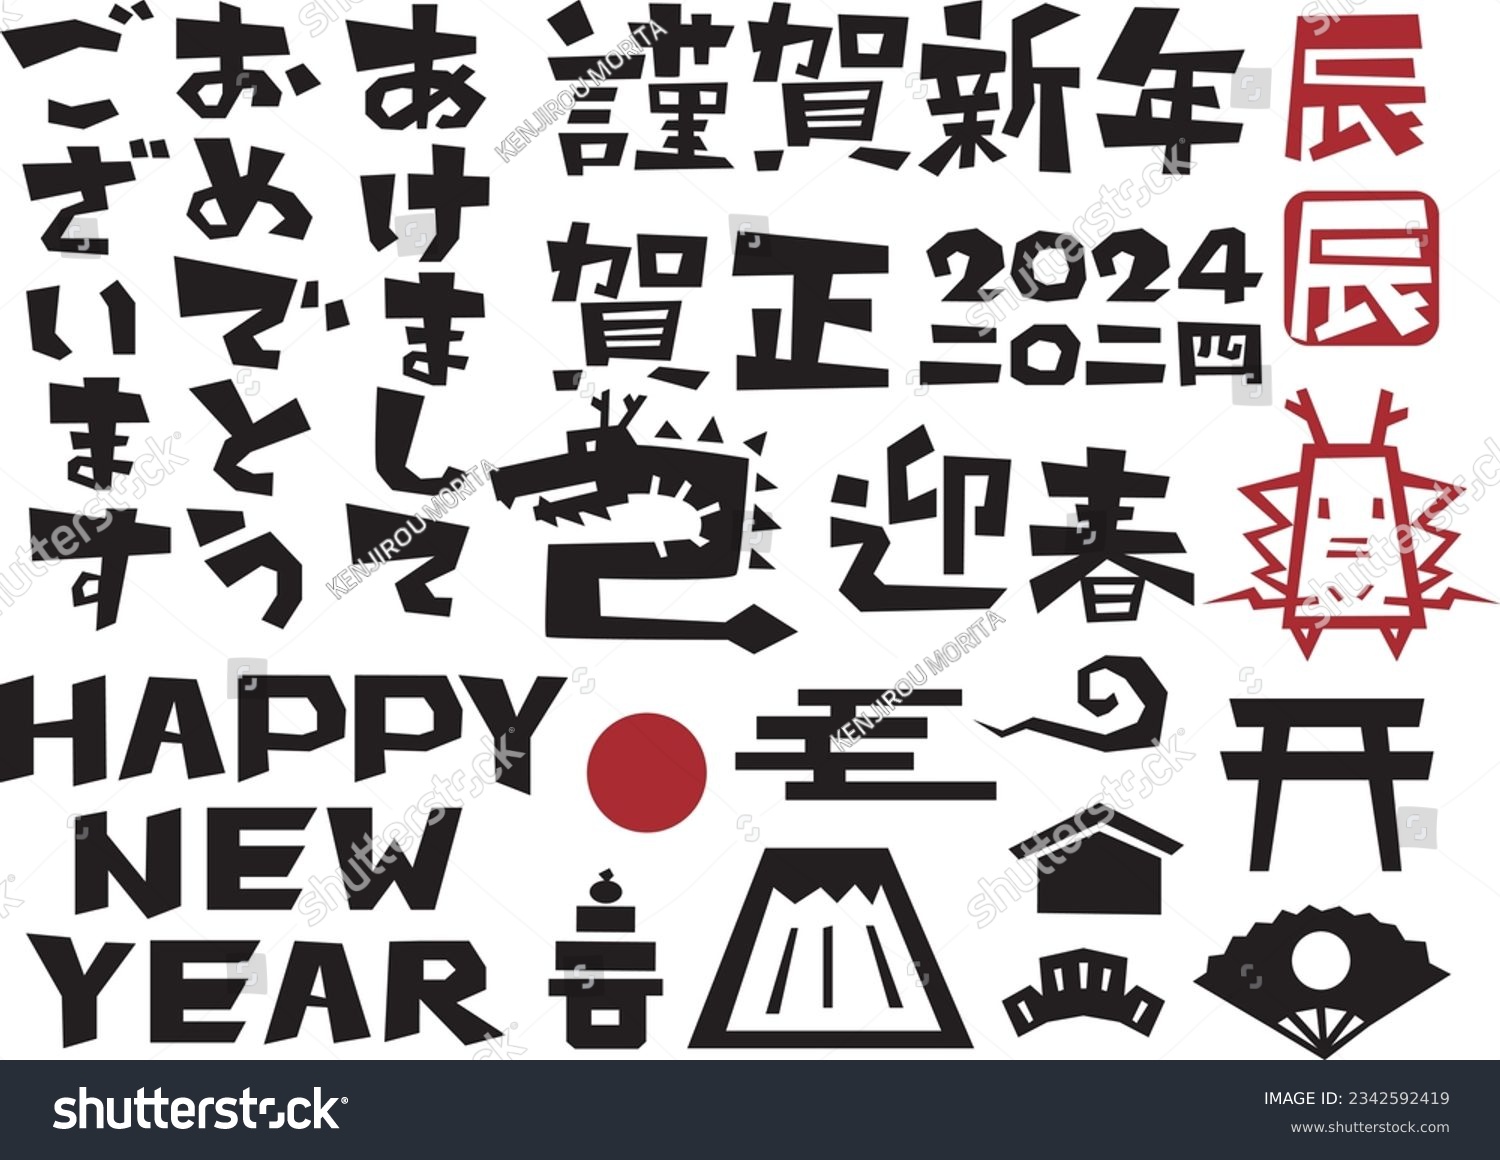 SVG of Material for New Year's cards in 2024 Year of the Dragon(Translation: Happy New Year, Year of the Dragon)
 svg